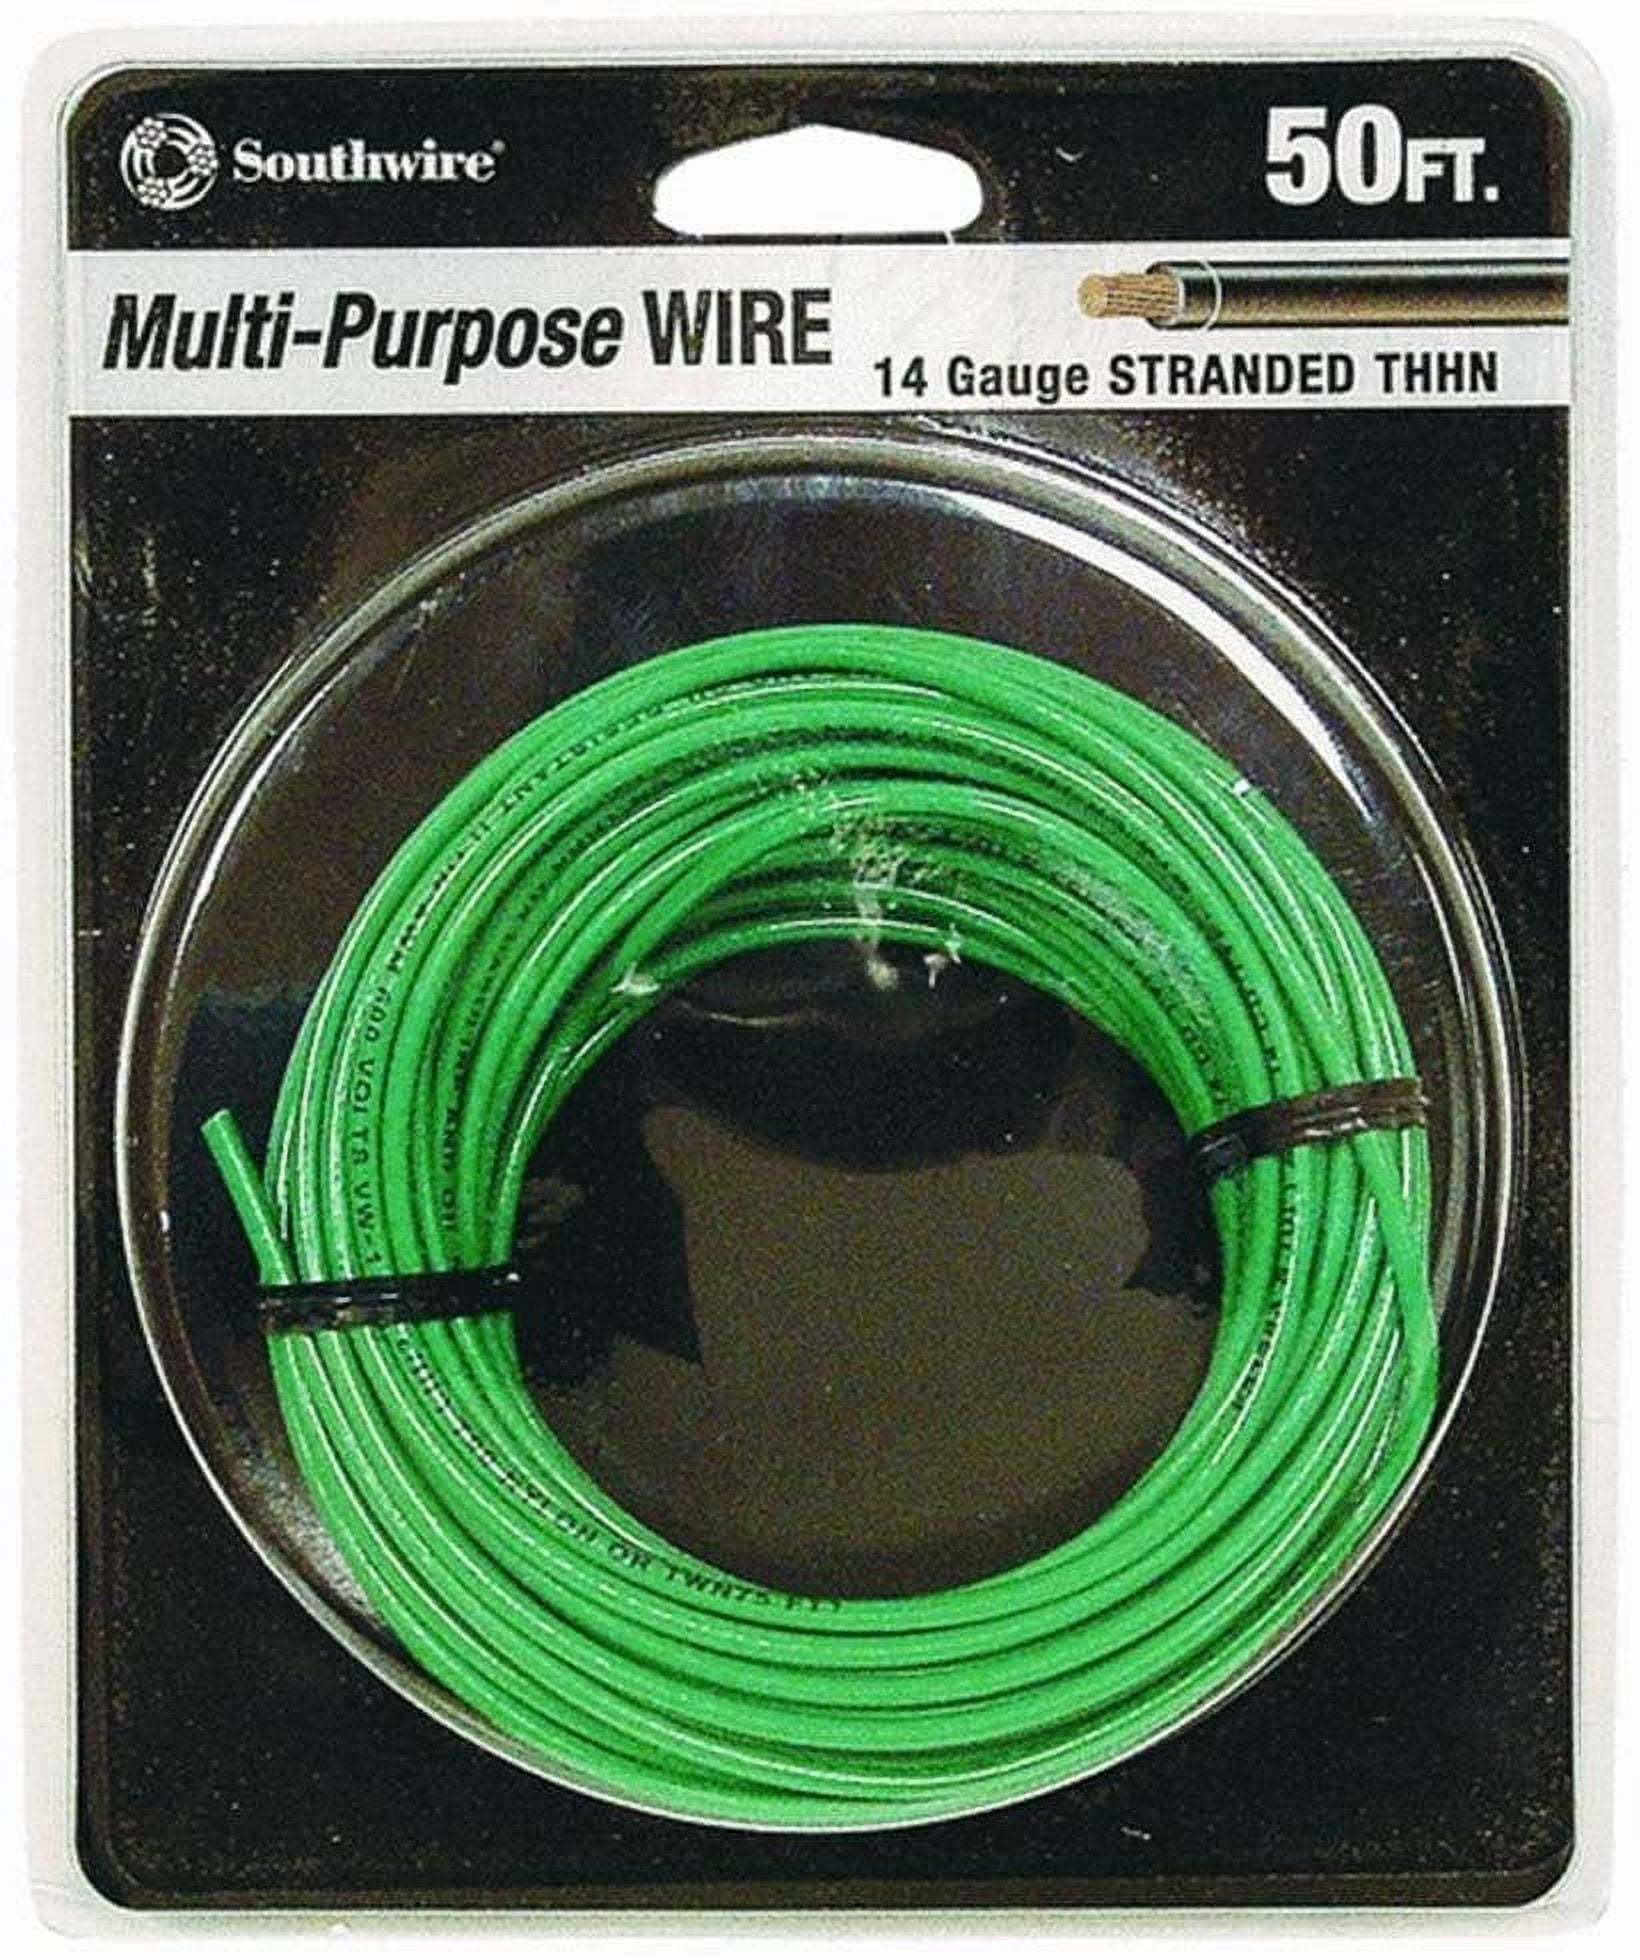 AC/DC Wire and Supply THHN THWN-2 600V 10 AWG Gauge Green Nylon Stranded Copper Building Wire (50 ft)